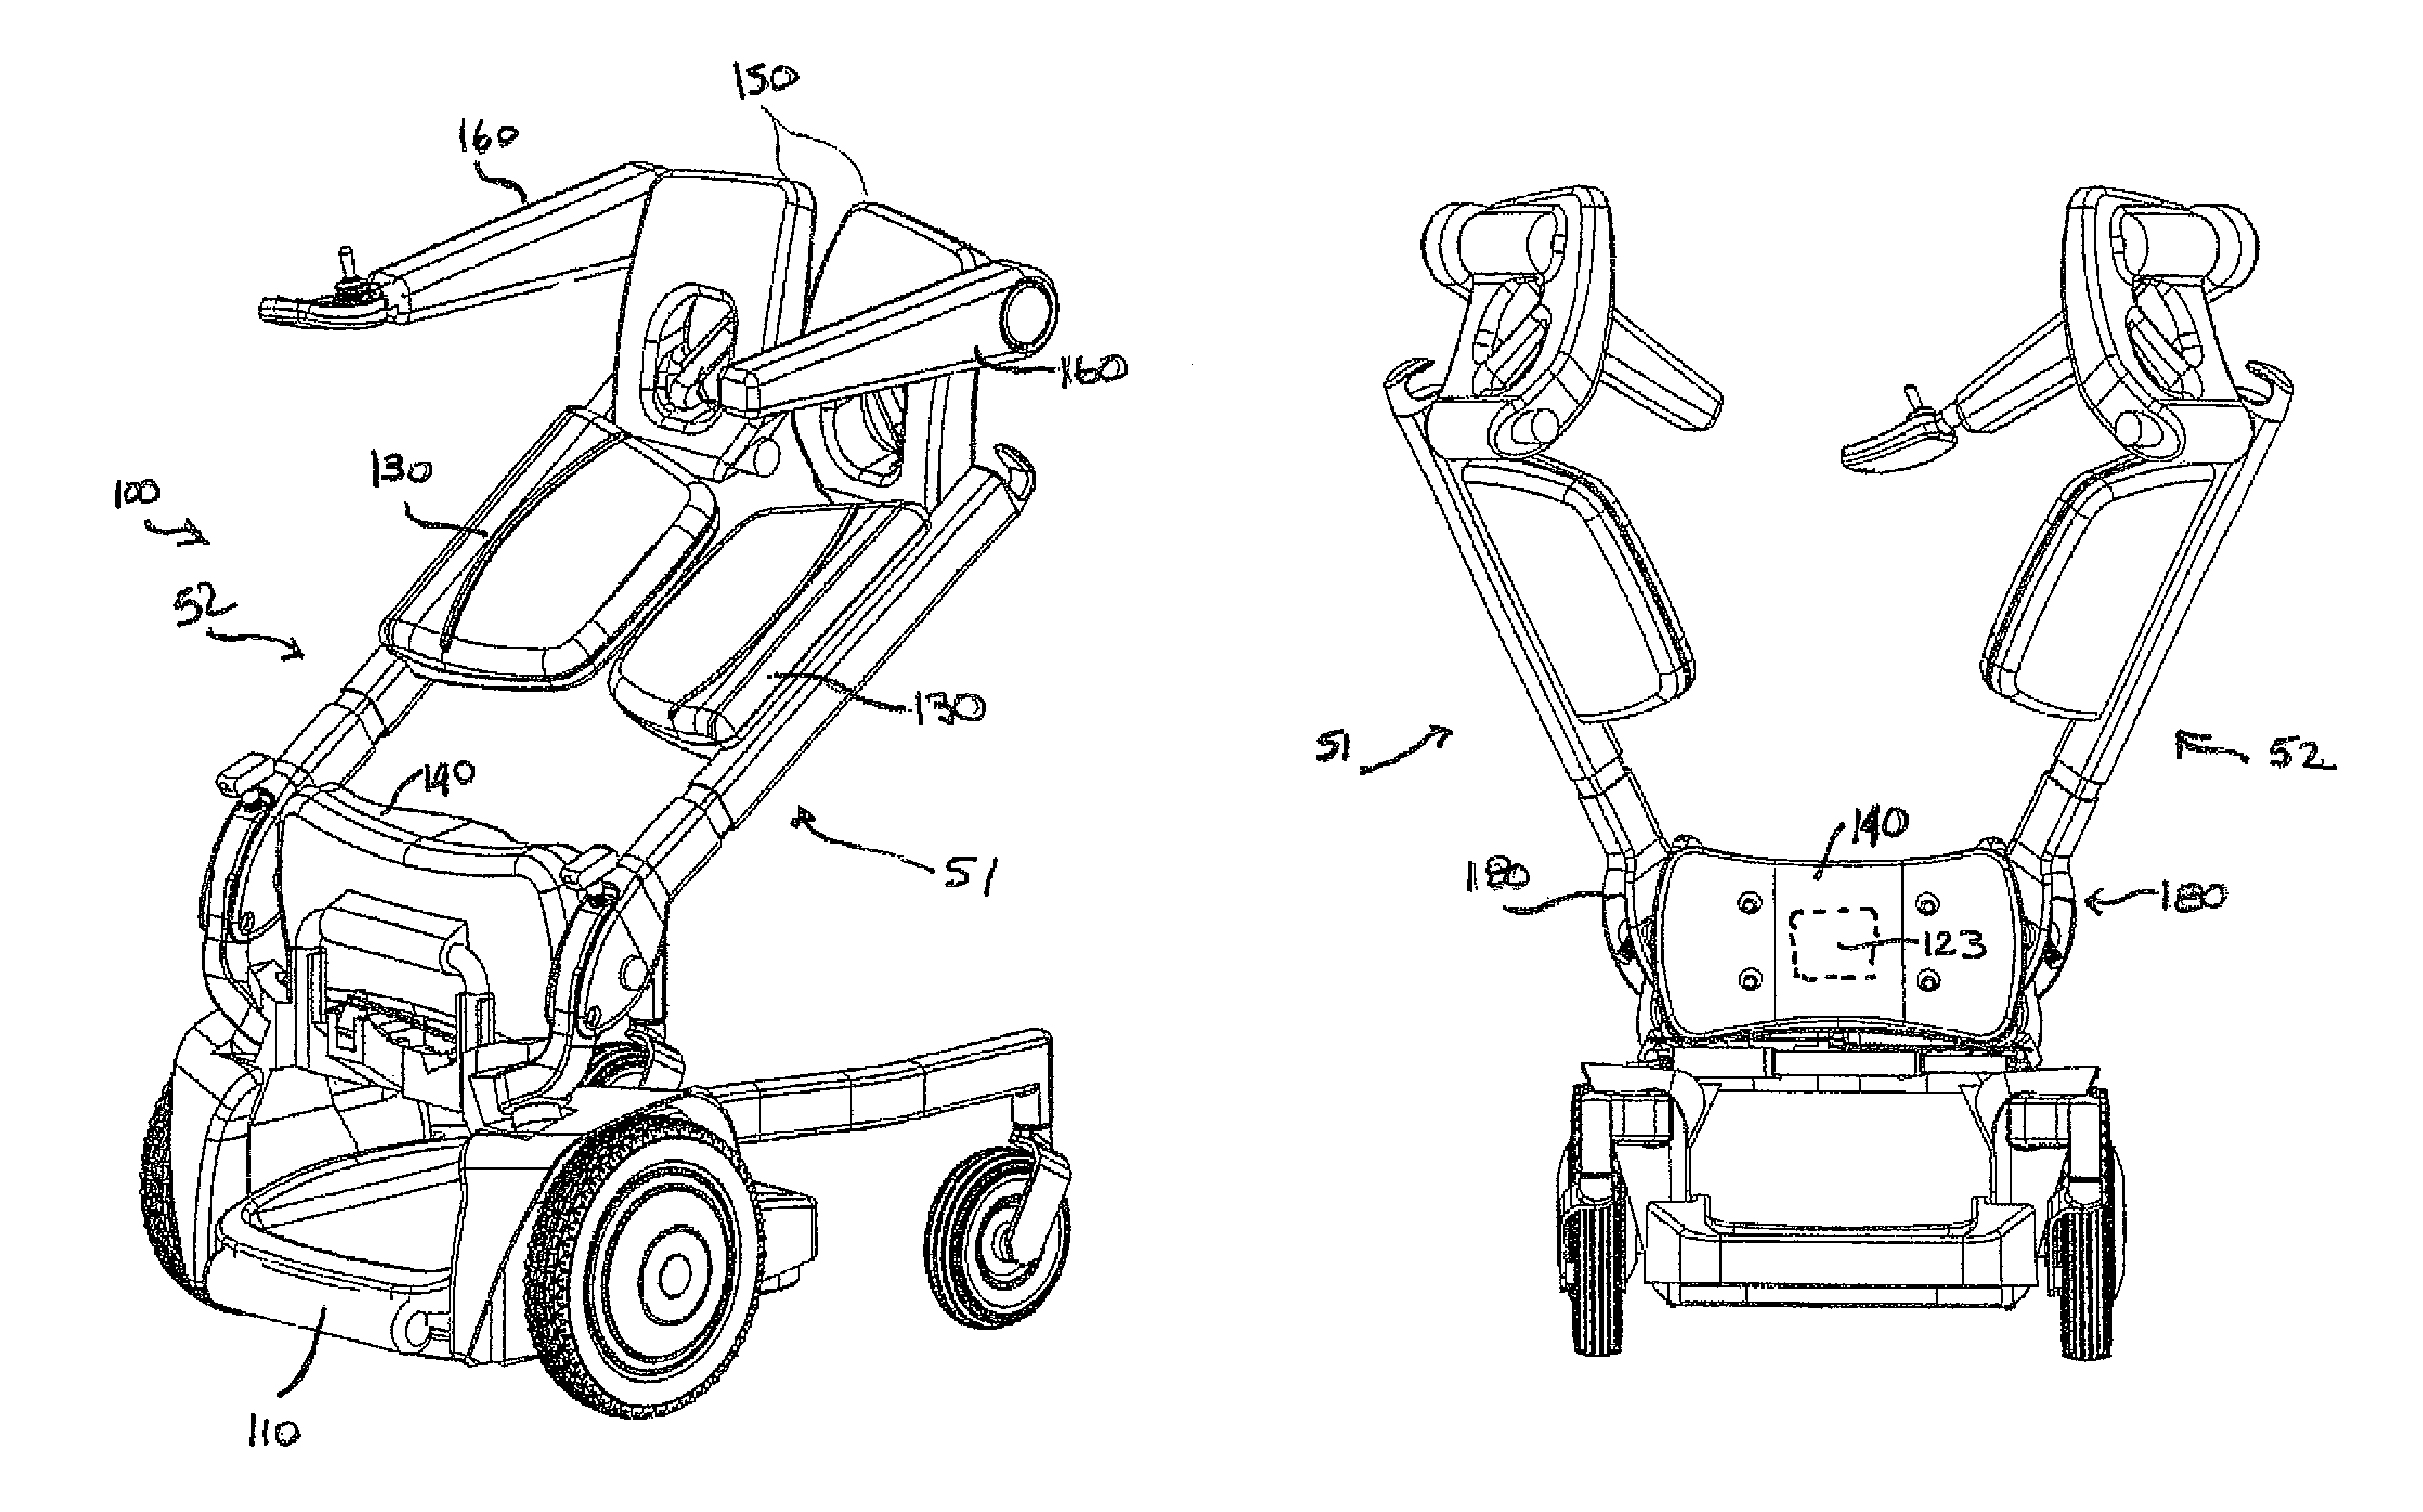 Mobility device